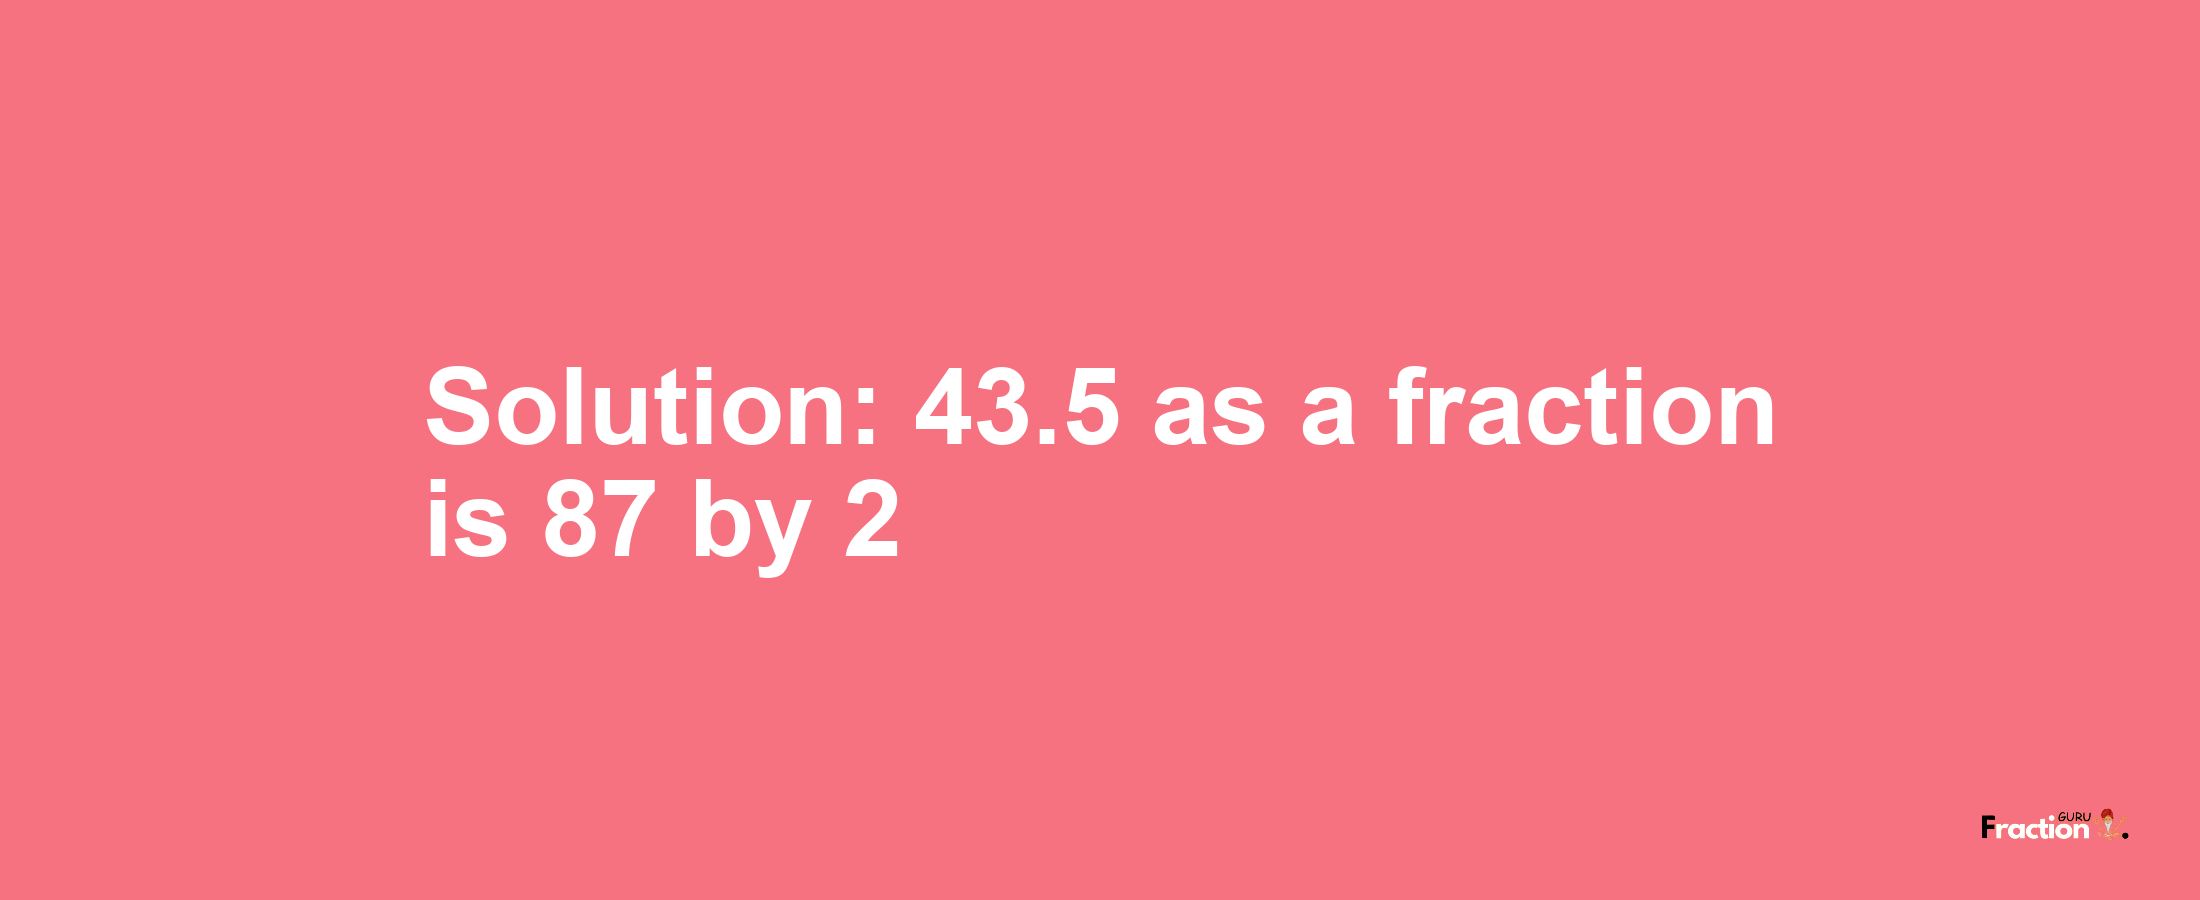 Solution:43.5 as a fraction is 87/2